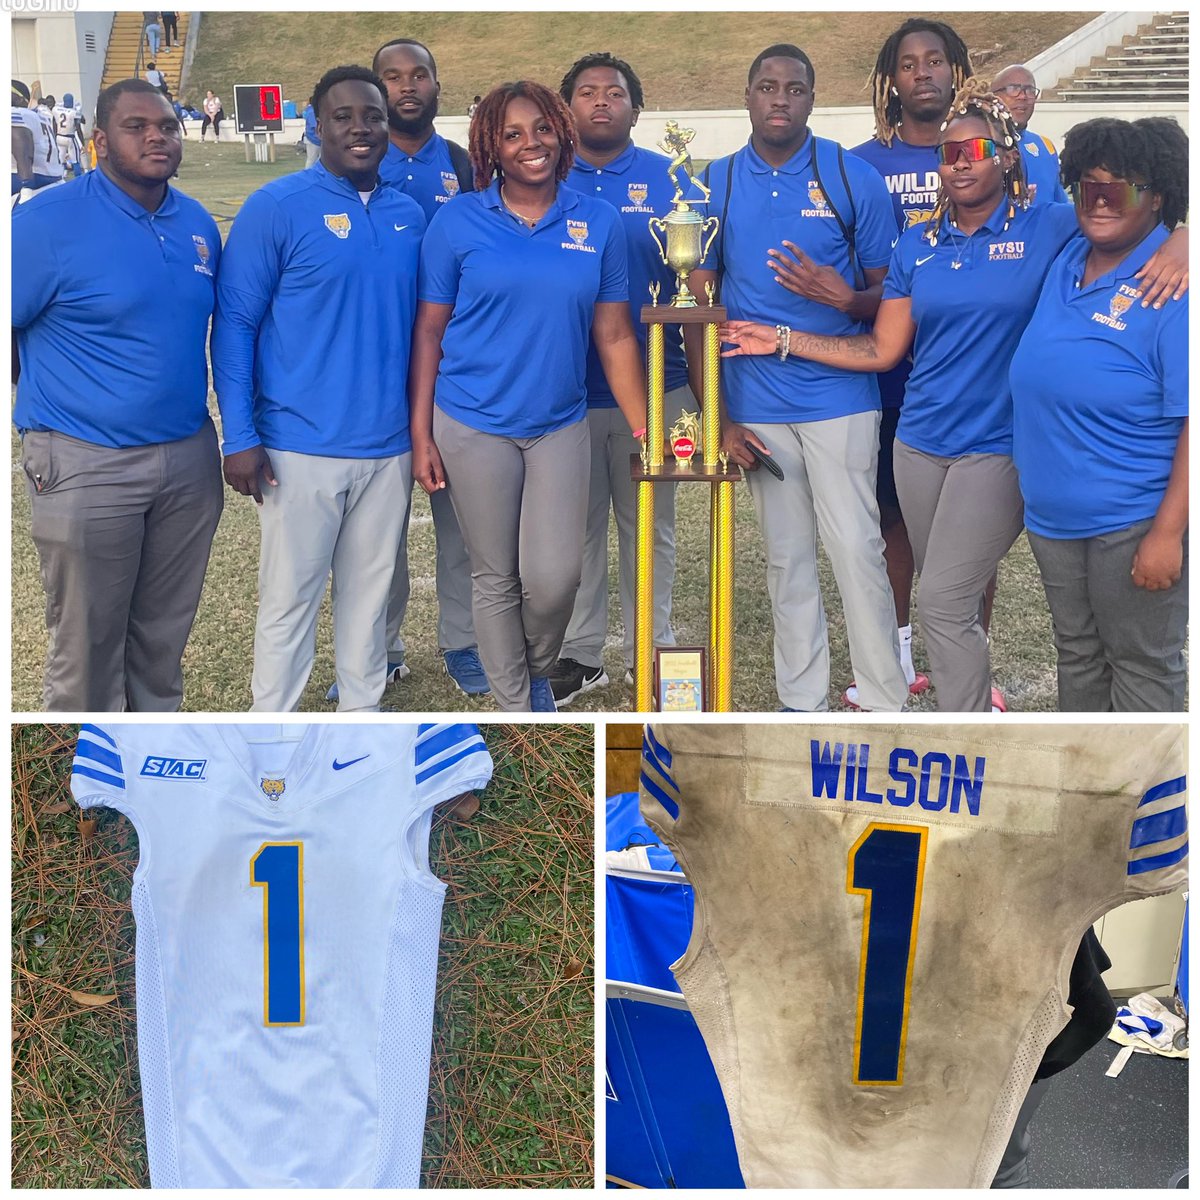 These are the real MVP’s! So thankful for @FVSU_EQUIPMENT ! Even though they are unseen they are the ones that are putting our players together! So while we were enjoying tailgating, they were back on campus unloading, washing uniforms, and so many other duties. Thank U💙💛 #fvsu